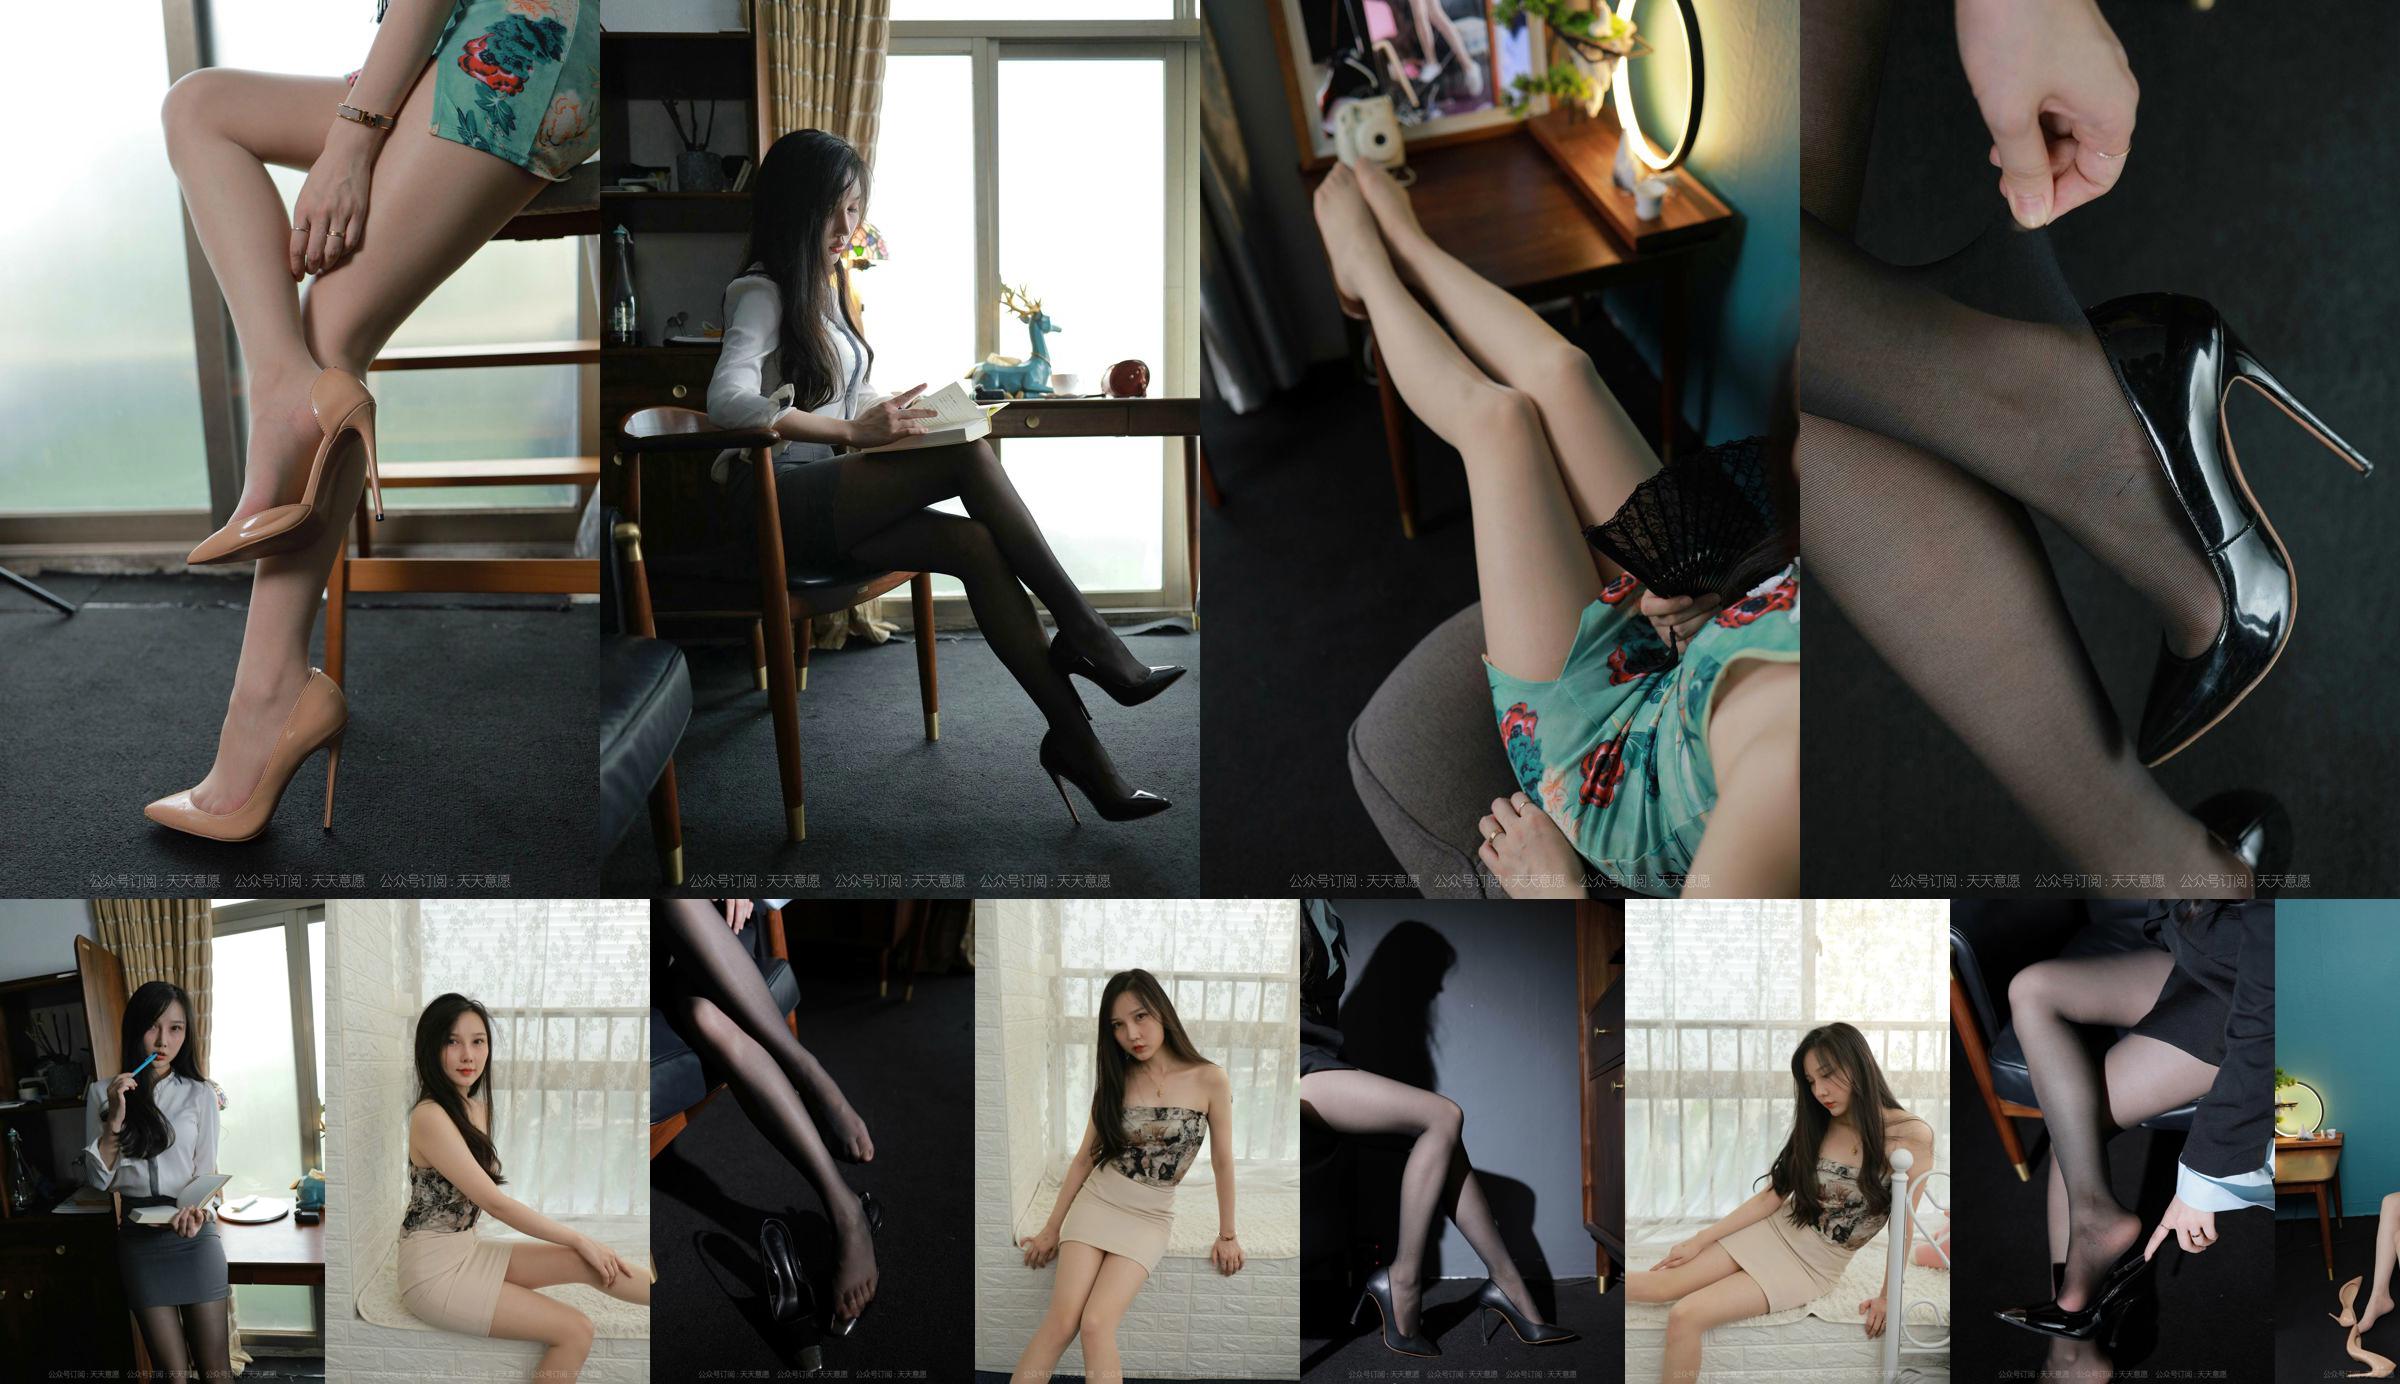 [IESS 奇思趣向] Model: Wen Xin "Sky Blue and Other Misty Rain" No.41bcbc Page 1